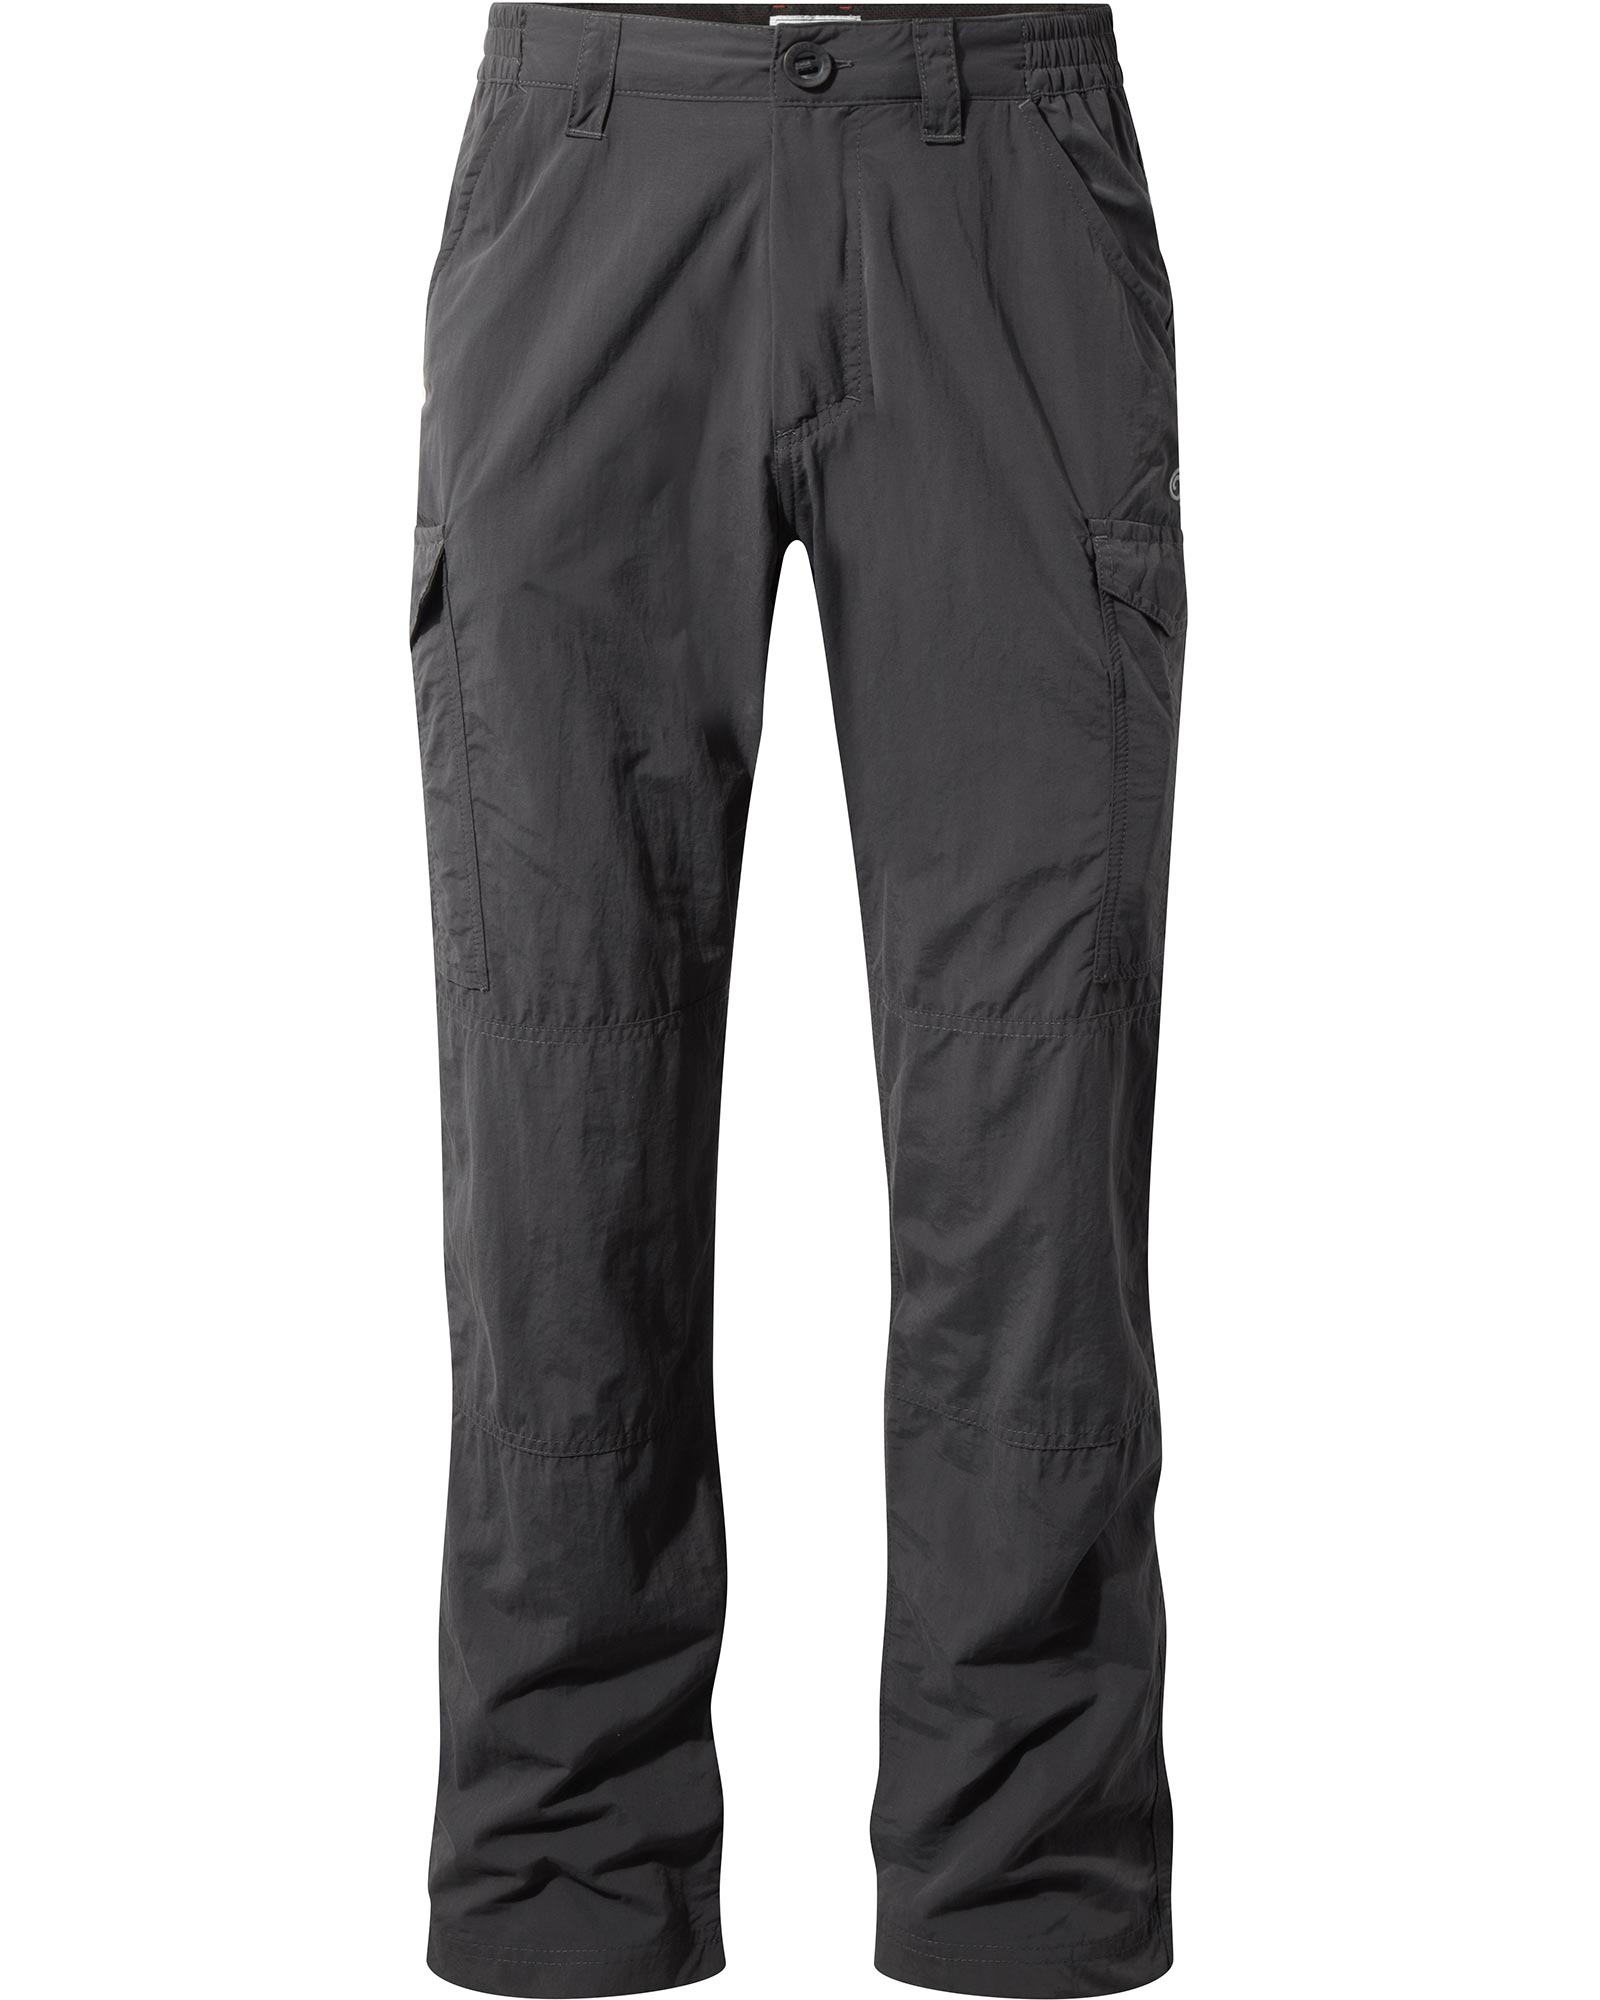 Craghoppers Nosilife Cargo Mens Trousers 33